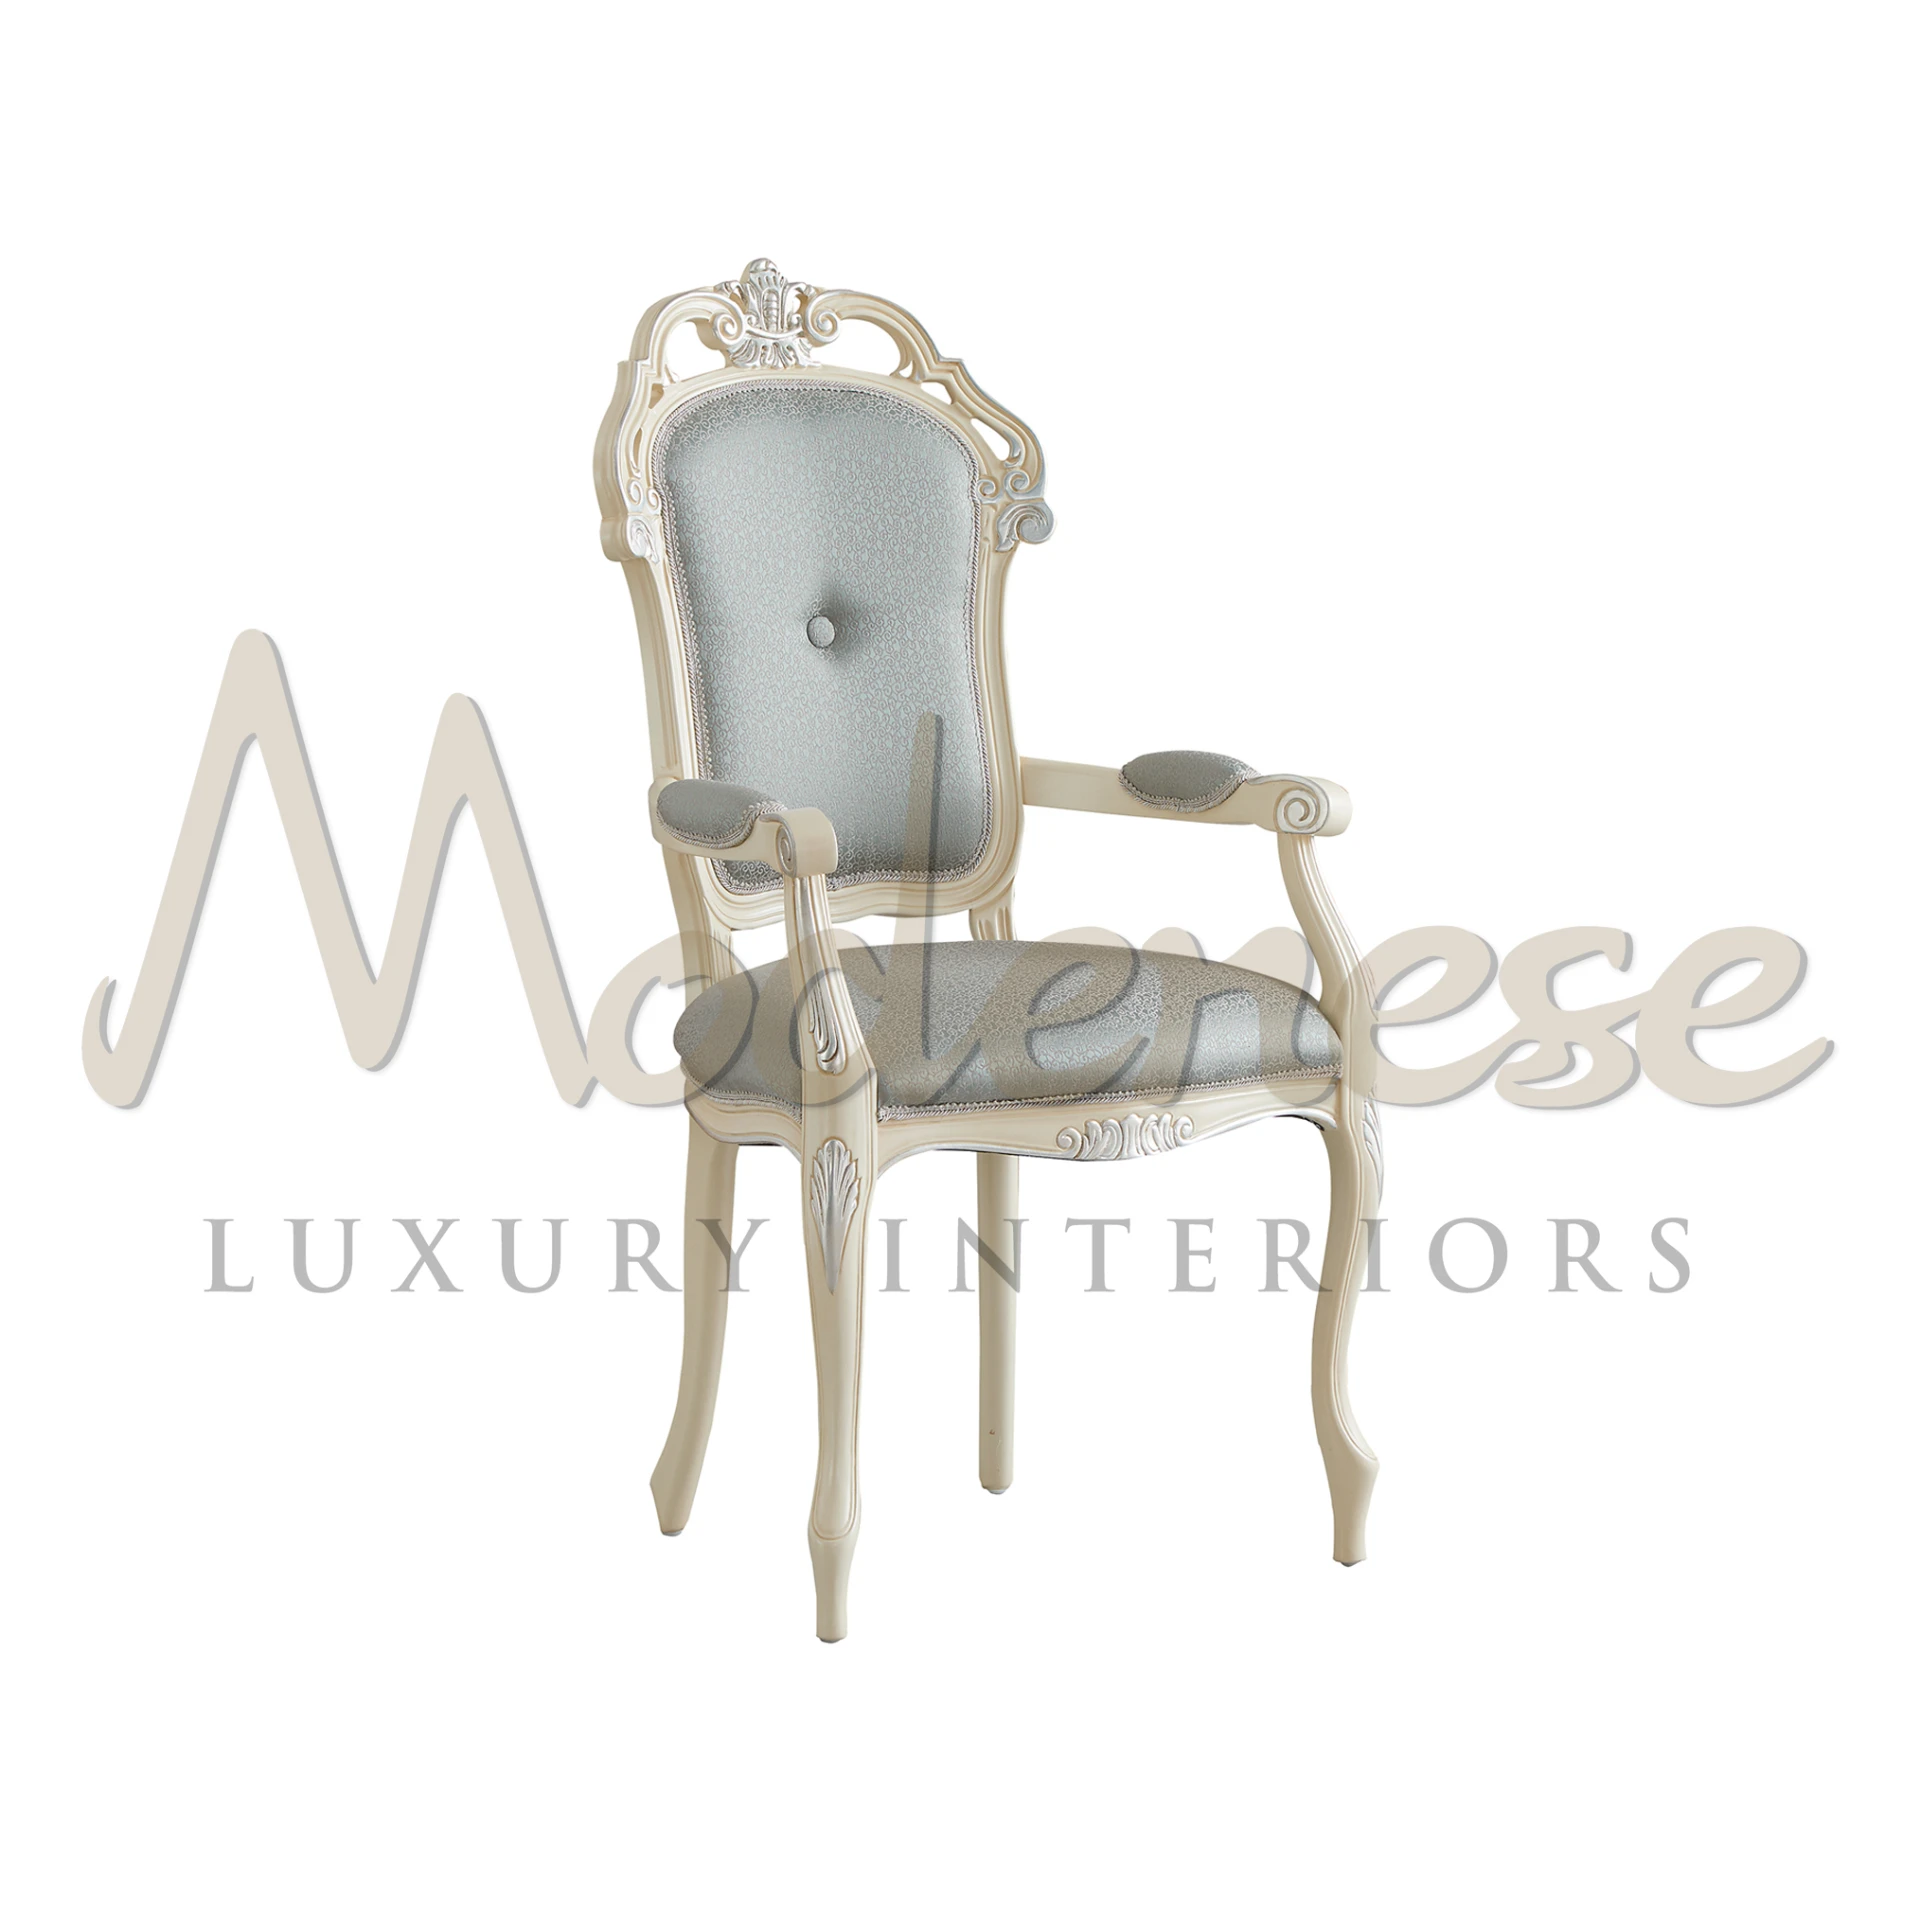 Elegant Victorian chair with armrests and complex design details